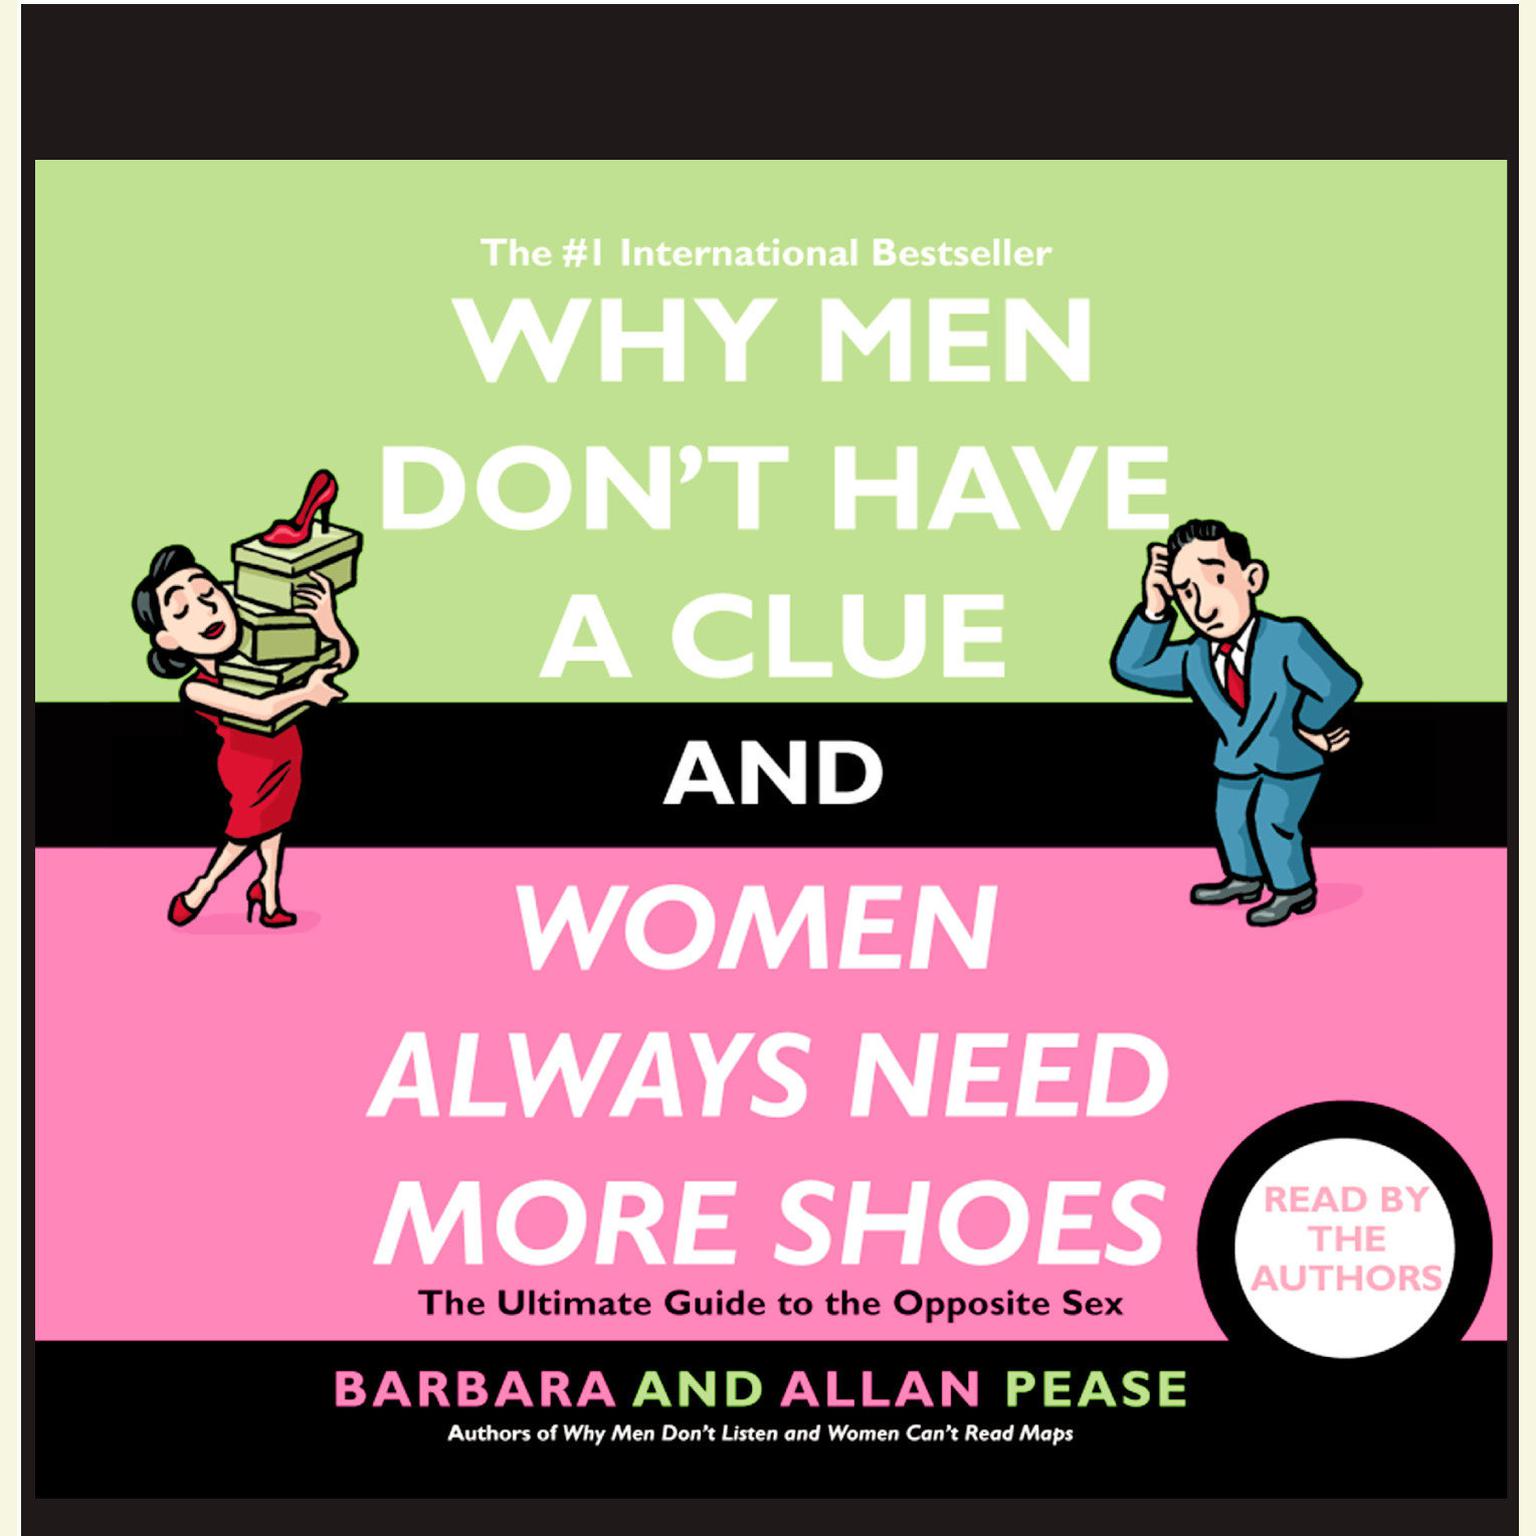 Why Men Dont Have a Clue and Women Always Need More Shoes (Abridged): The Ultimate GUide to the Opposite Sex Audiobook, by Allan Pease